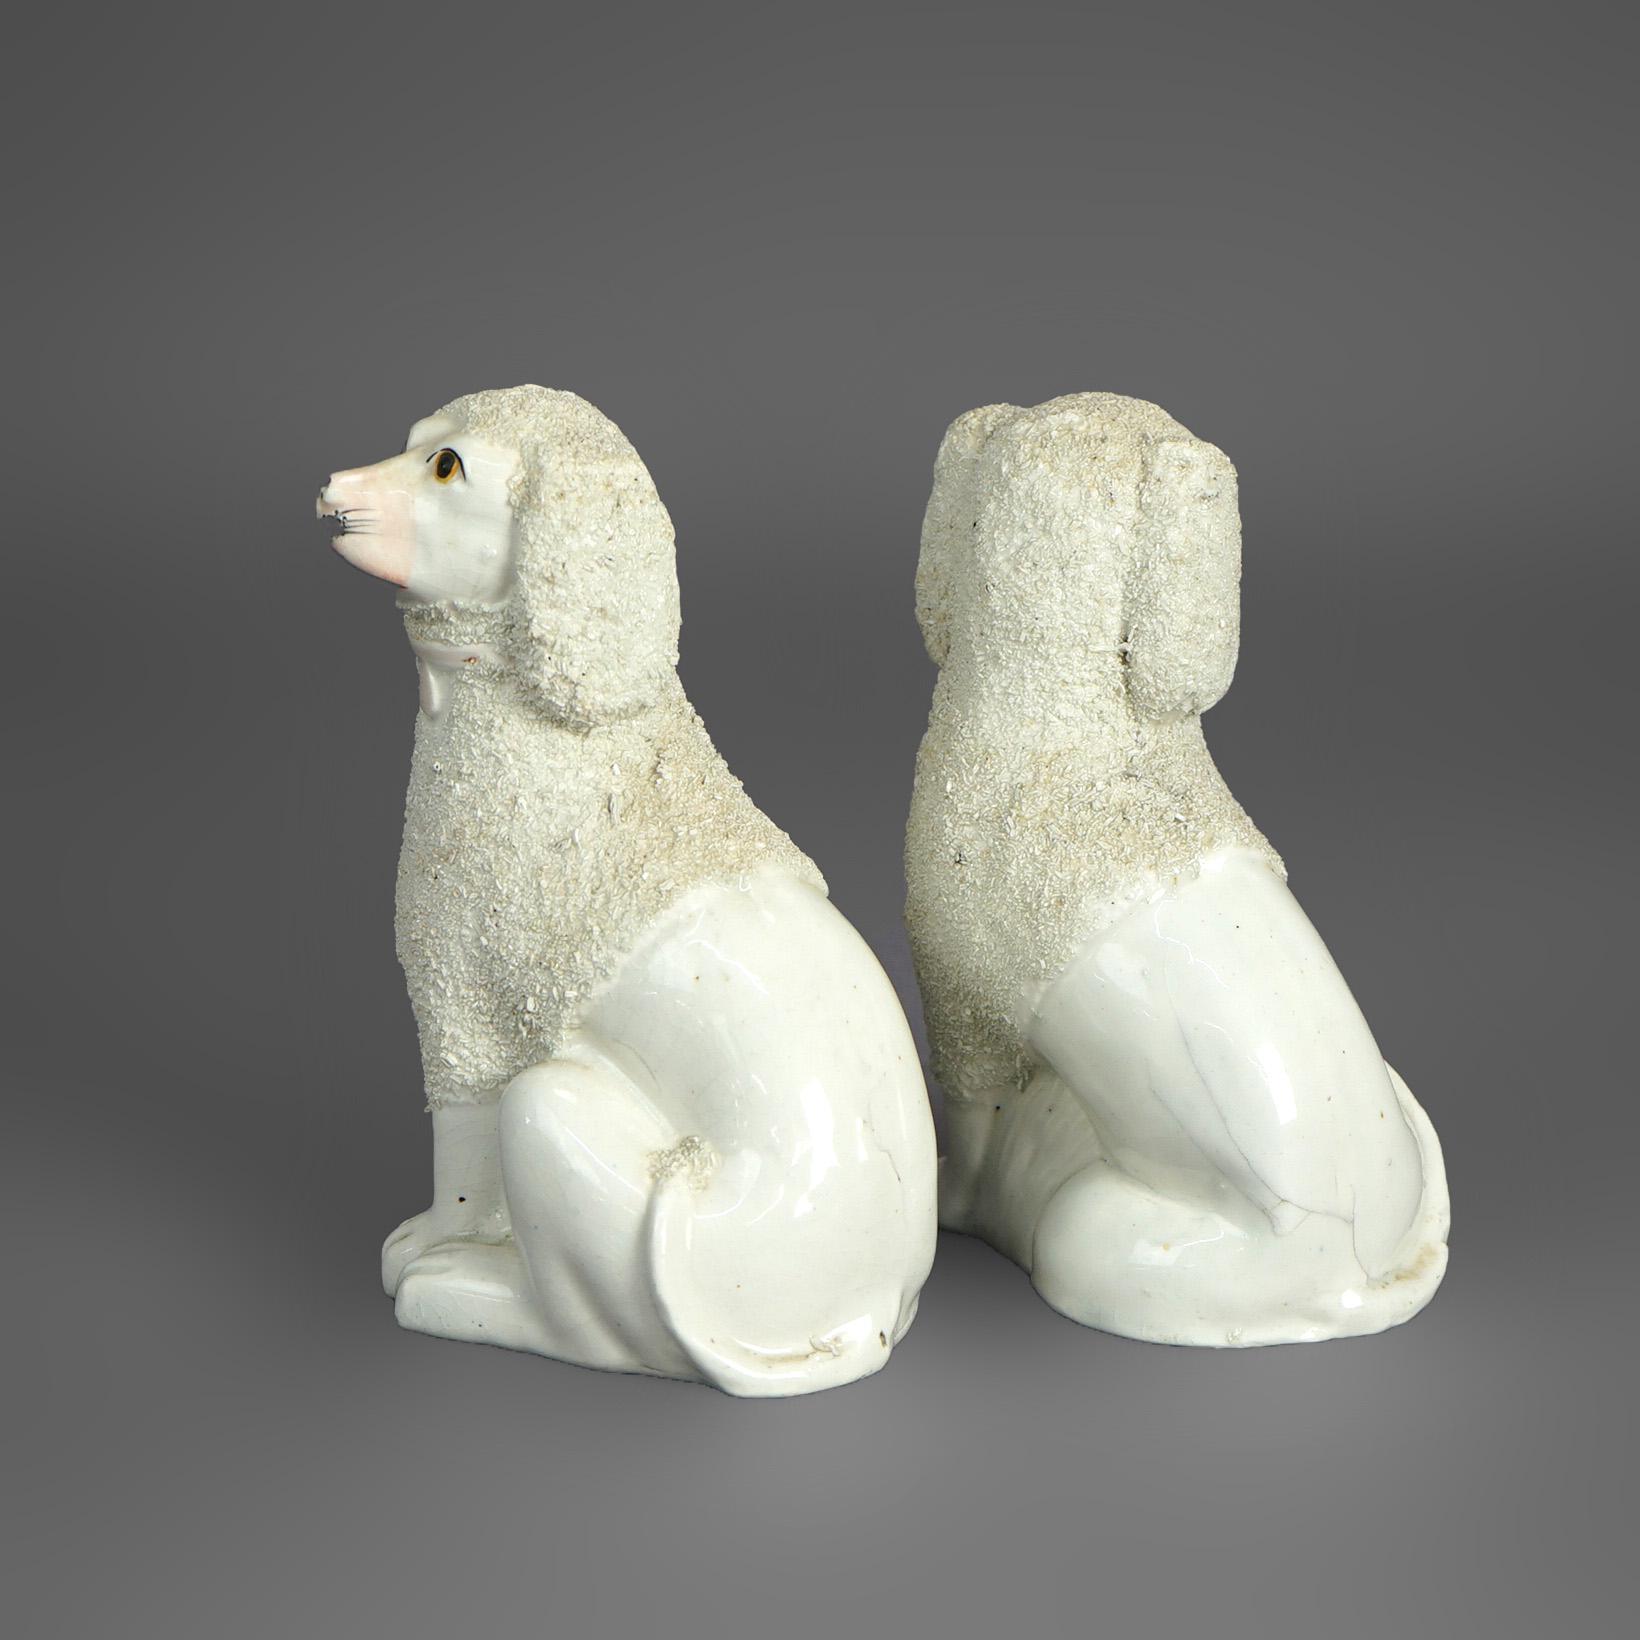 Antique Pair of English Staffordshire Porcelain Dogs C1870 For Sale 2